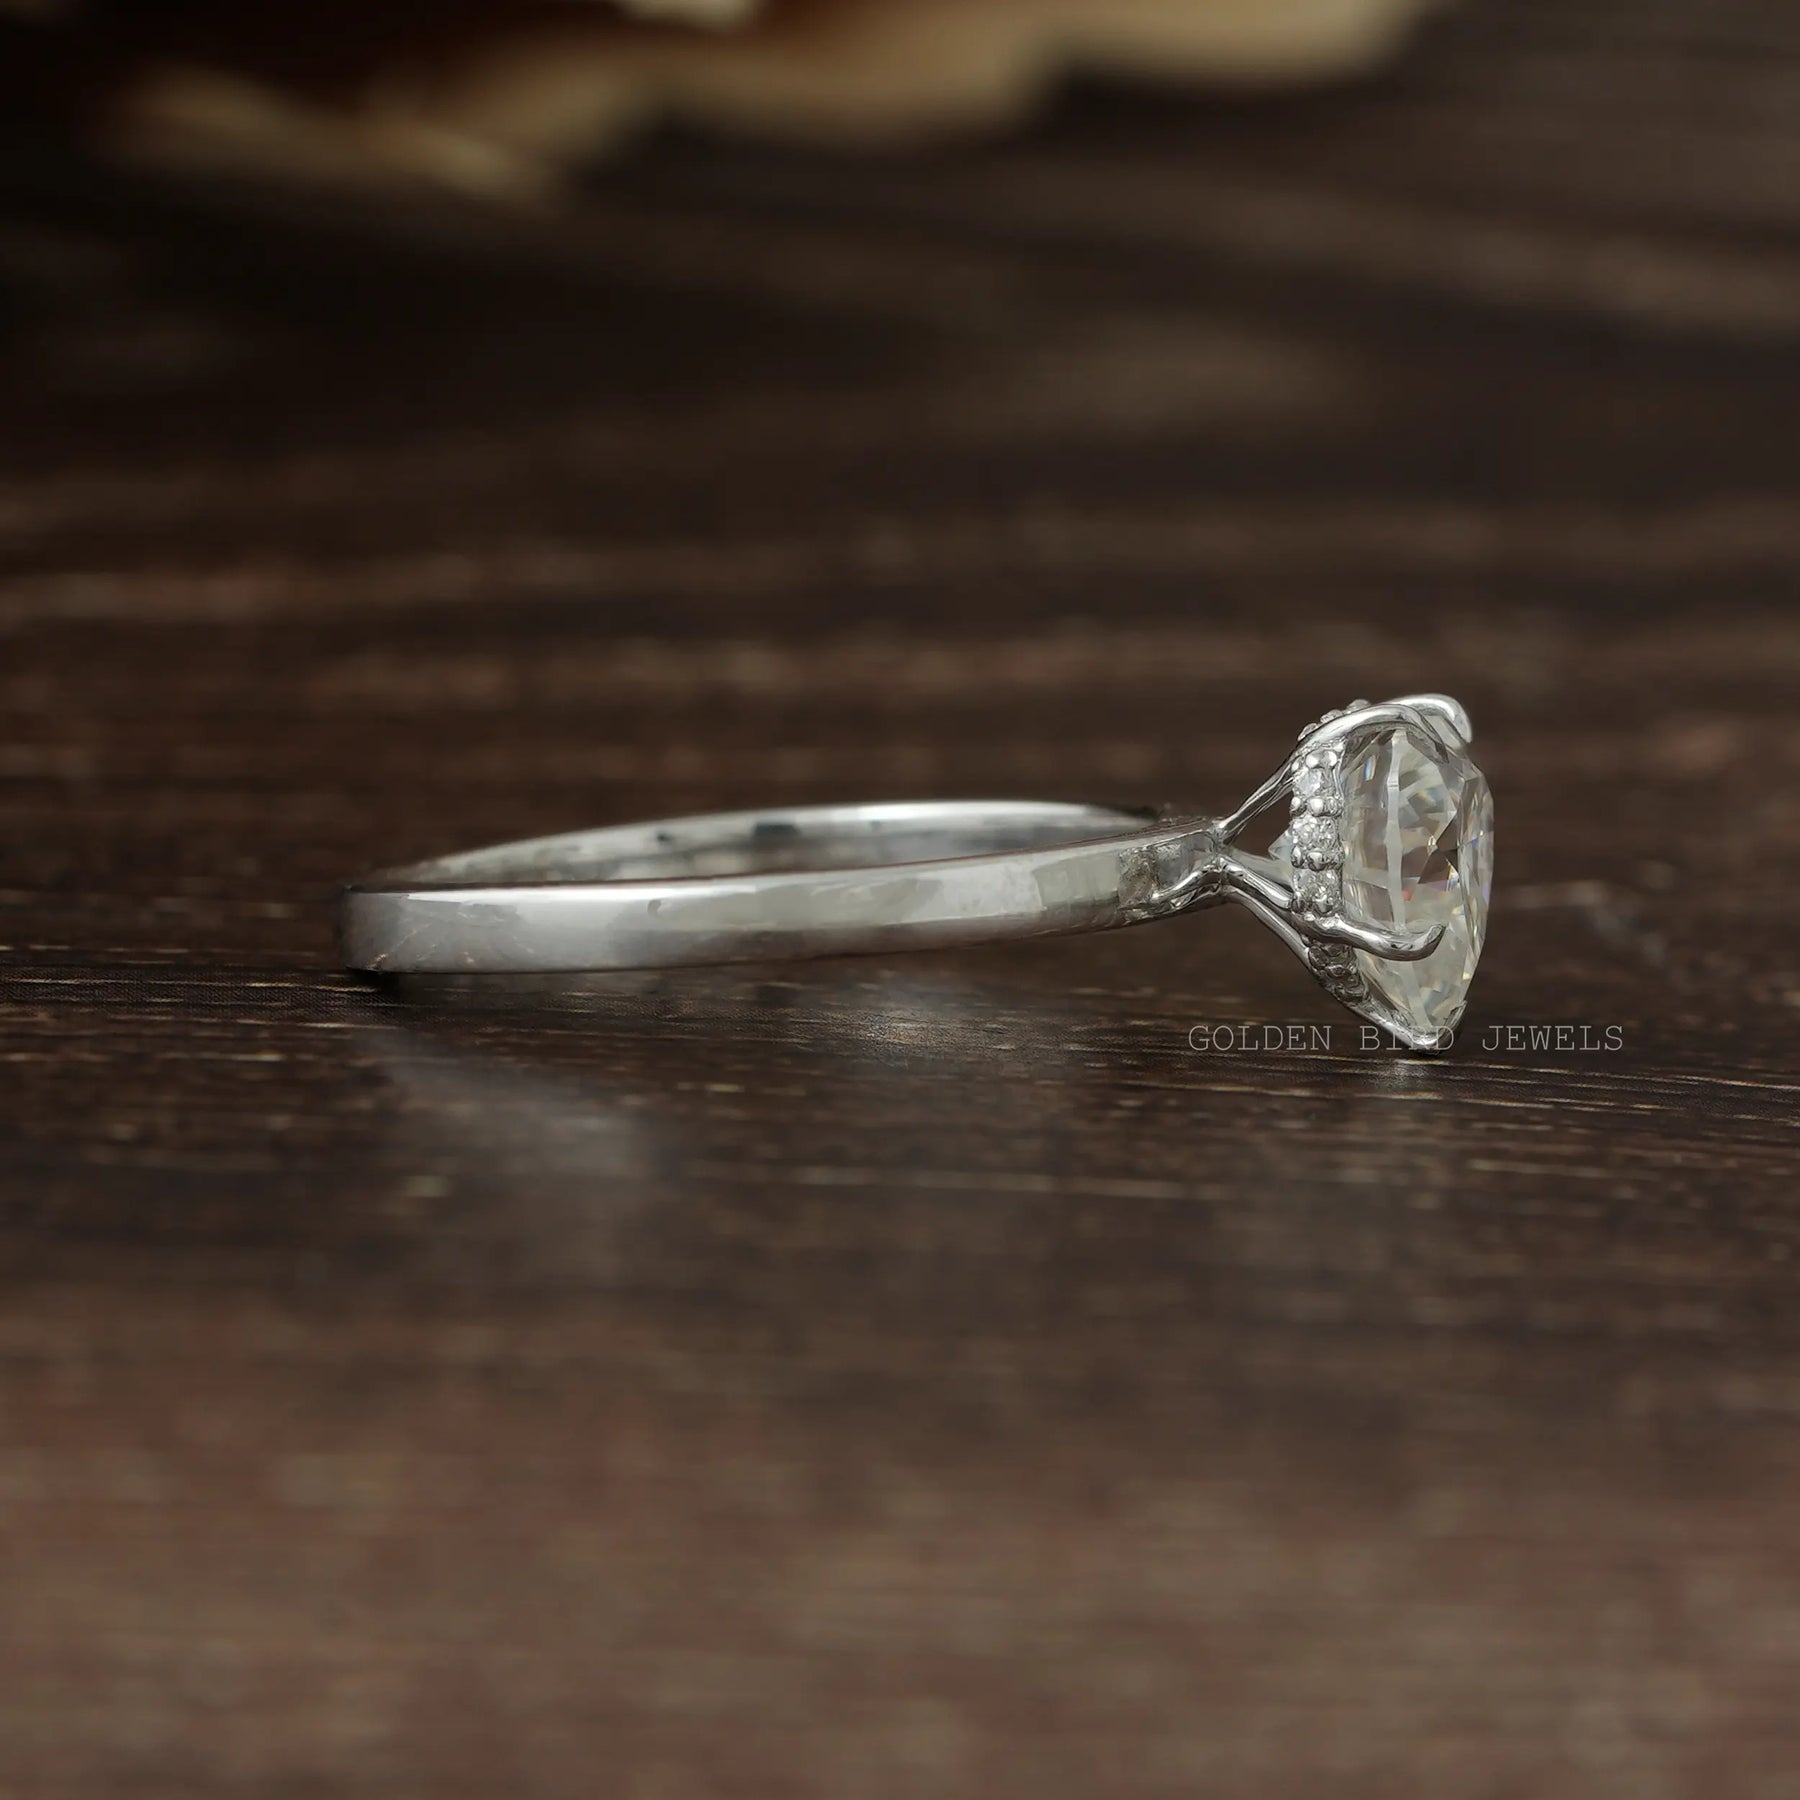 [Classic style moissanite solitaire with hidden halo engagement ring]-[Golden Bird Jewels]